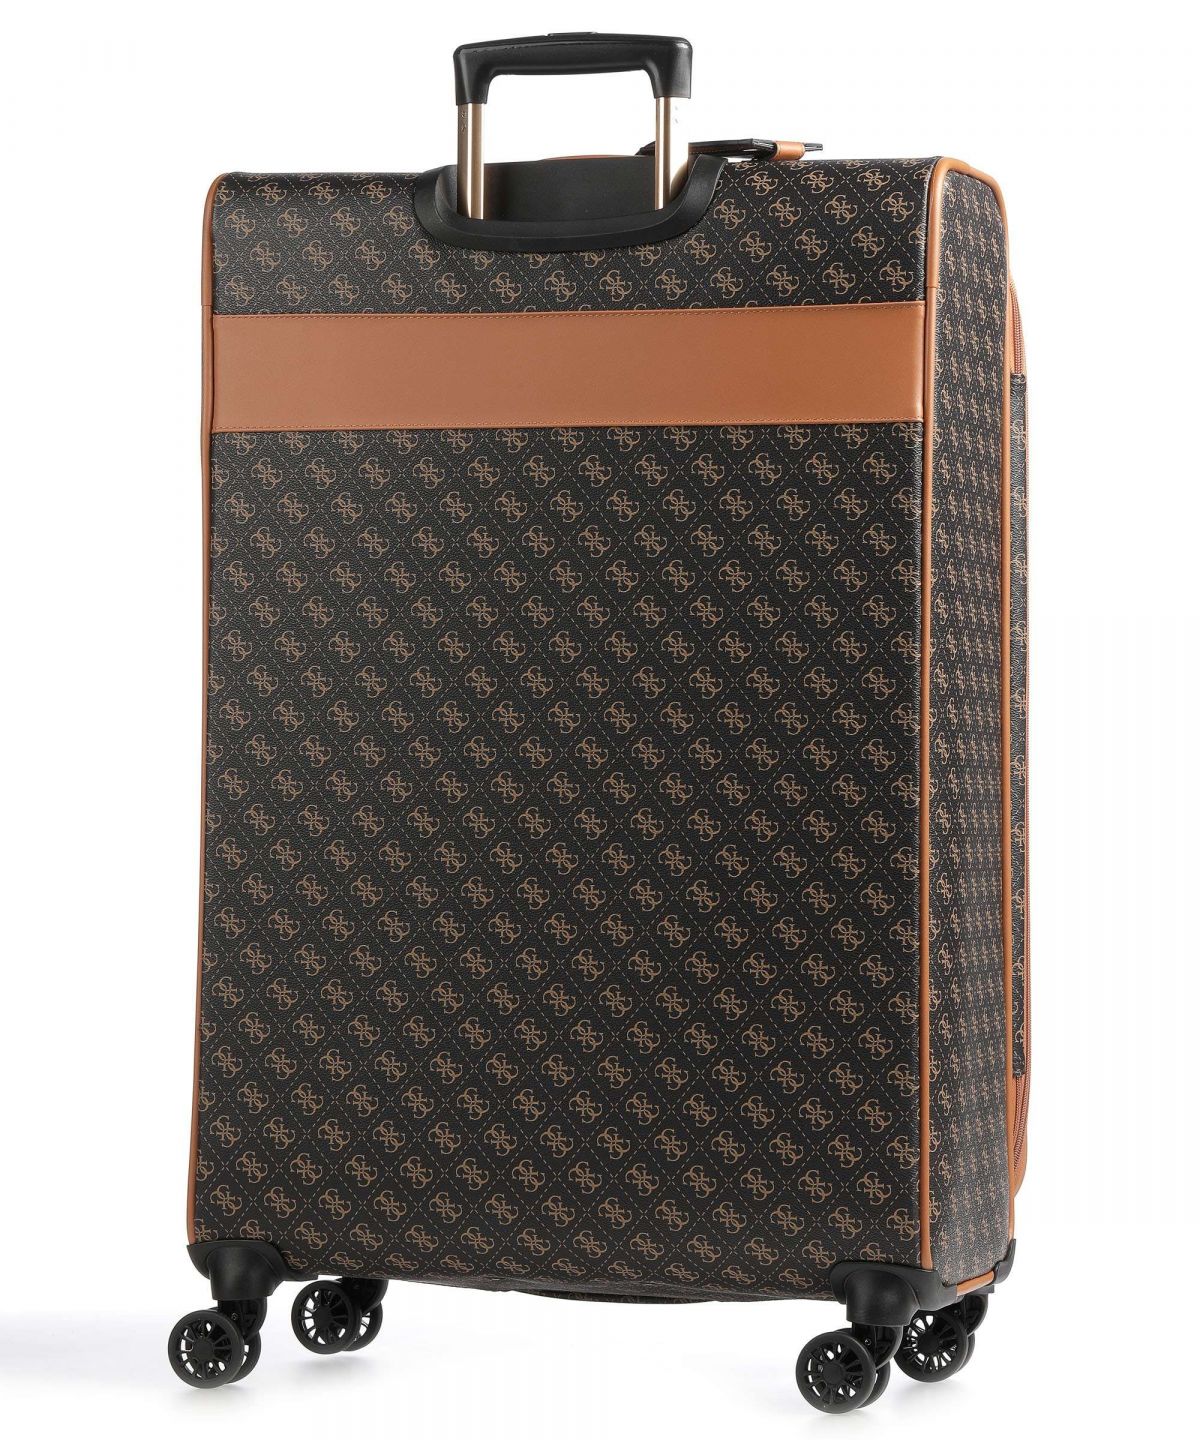 Guess trolley suitcase TWE84059880